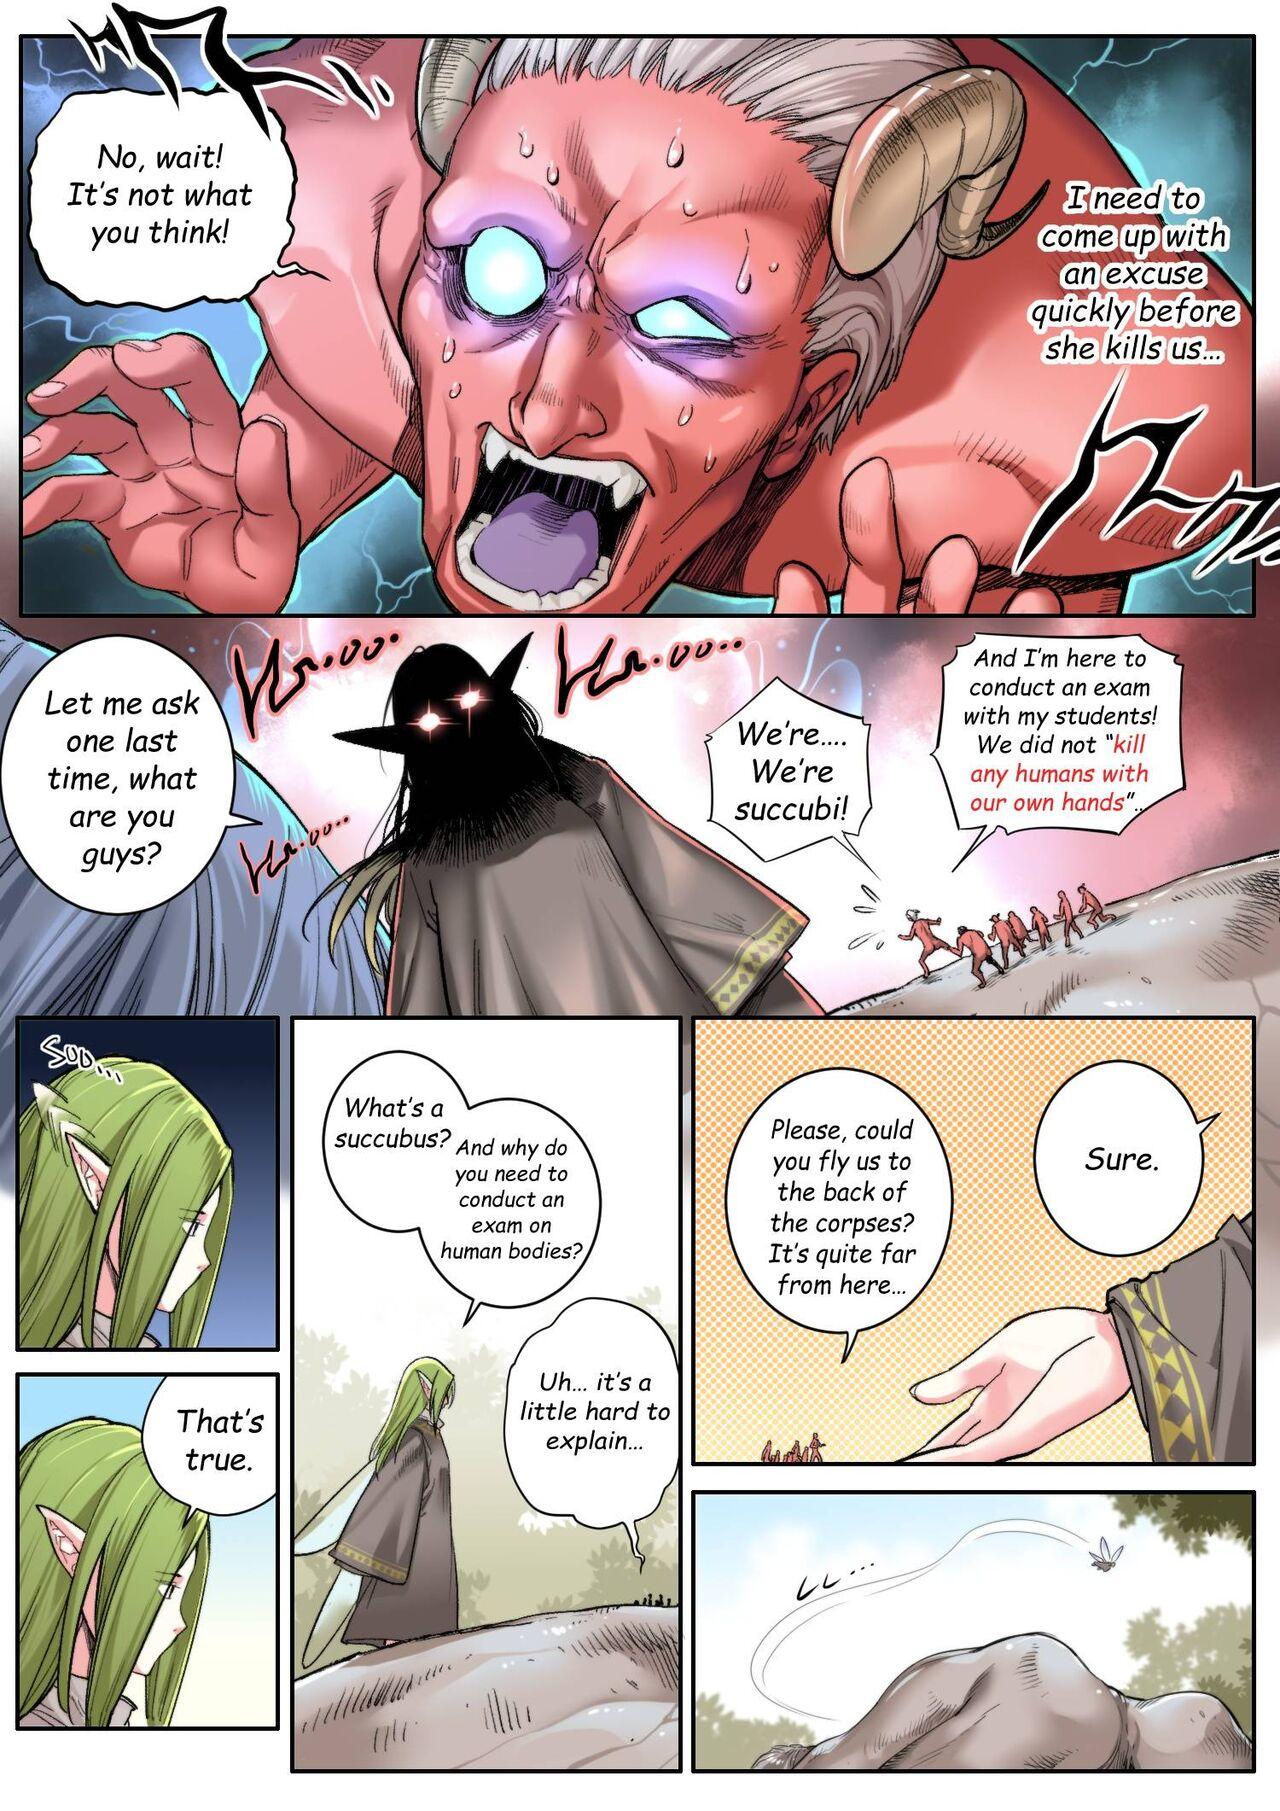 Hot Timeless Reunion Sucking Cock - Page 8